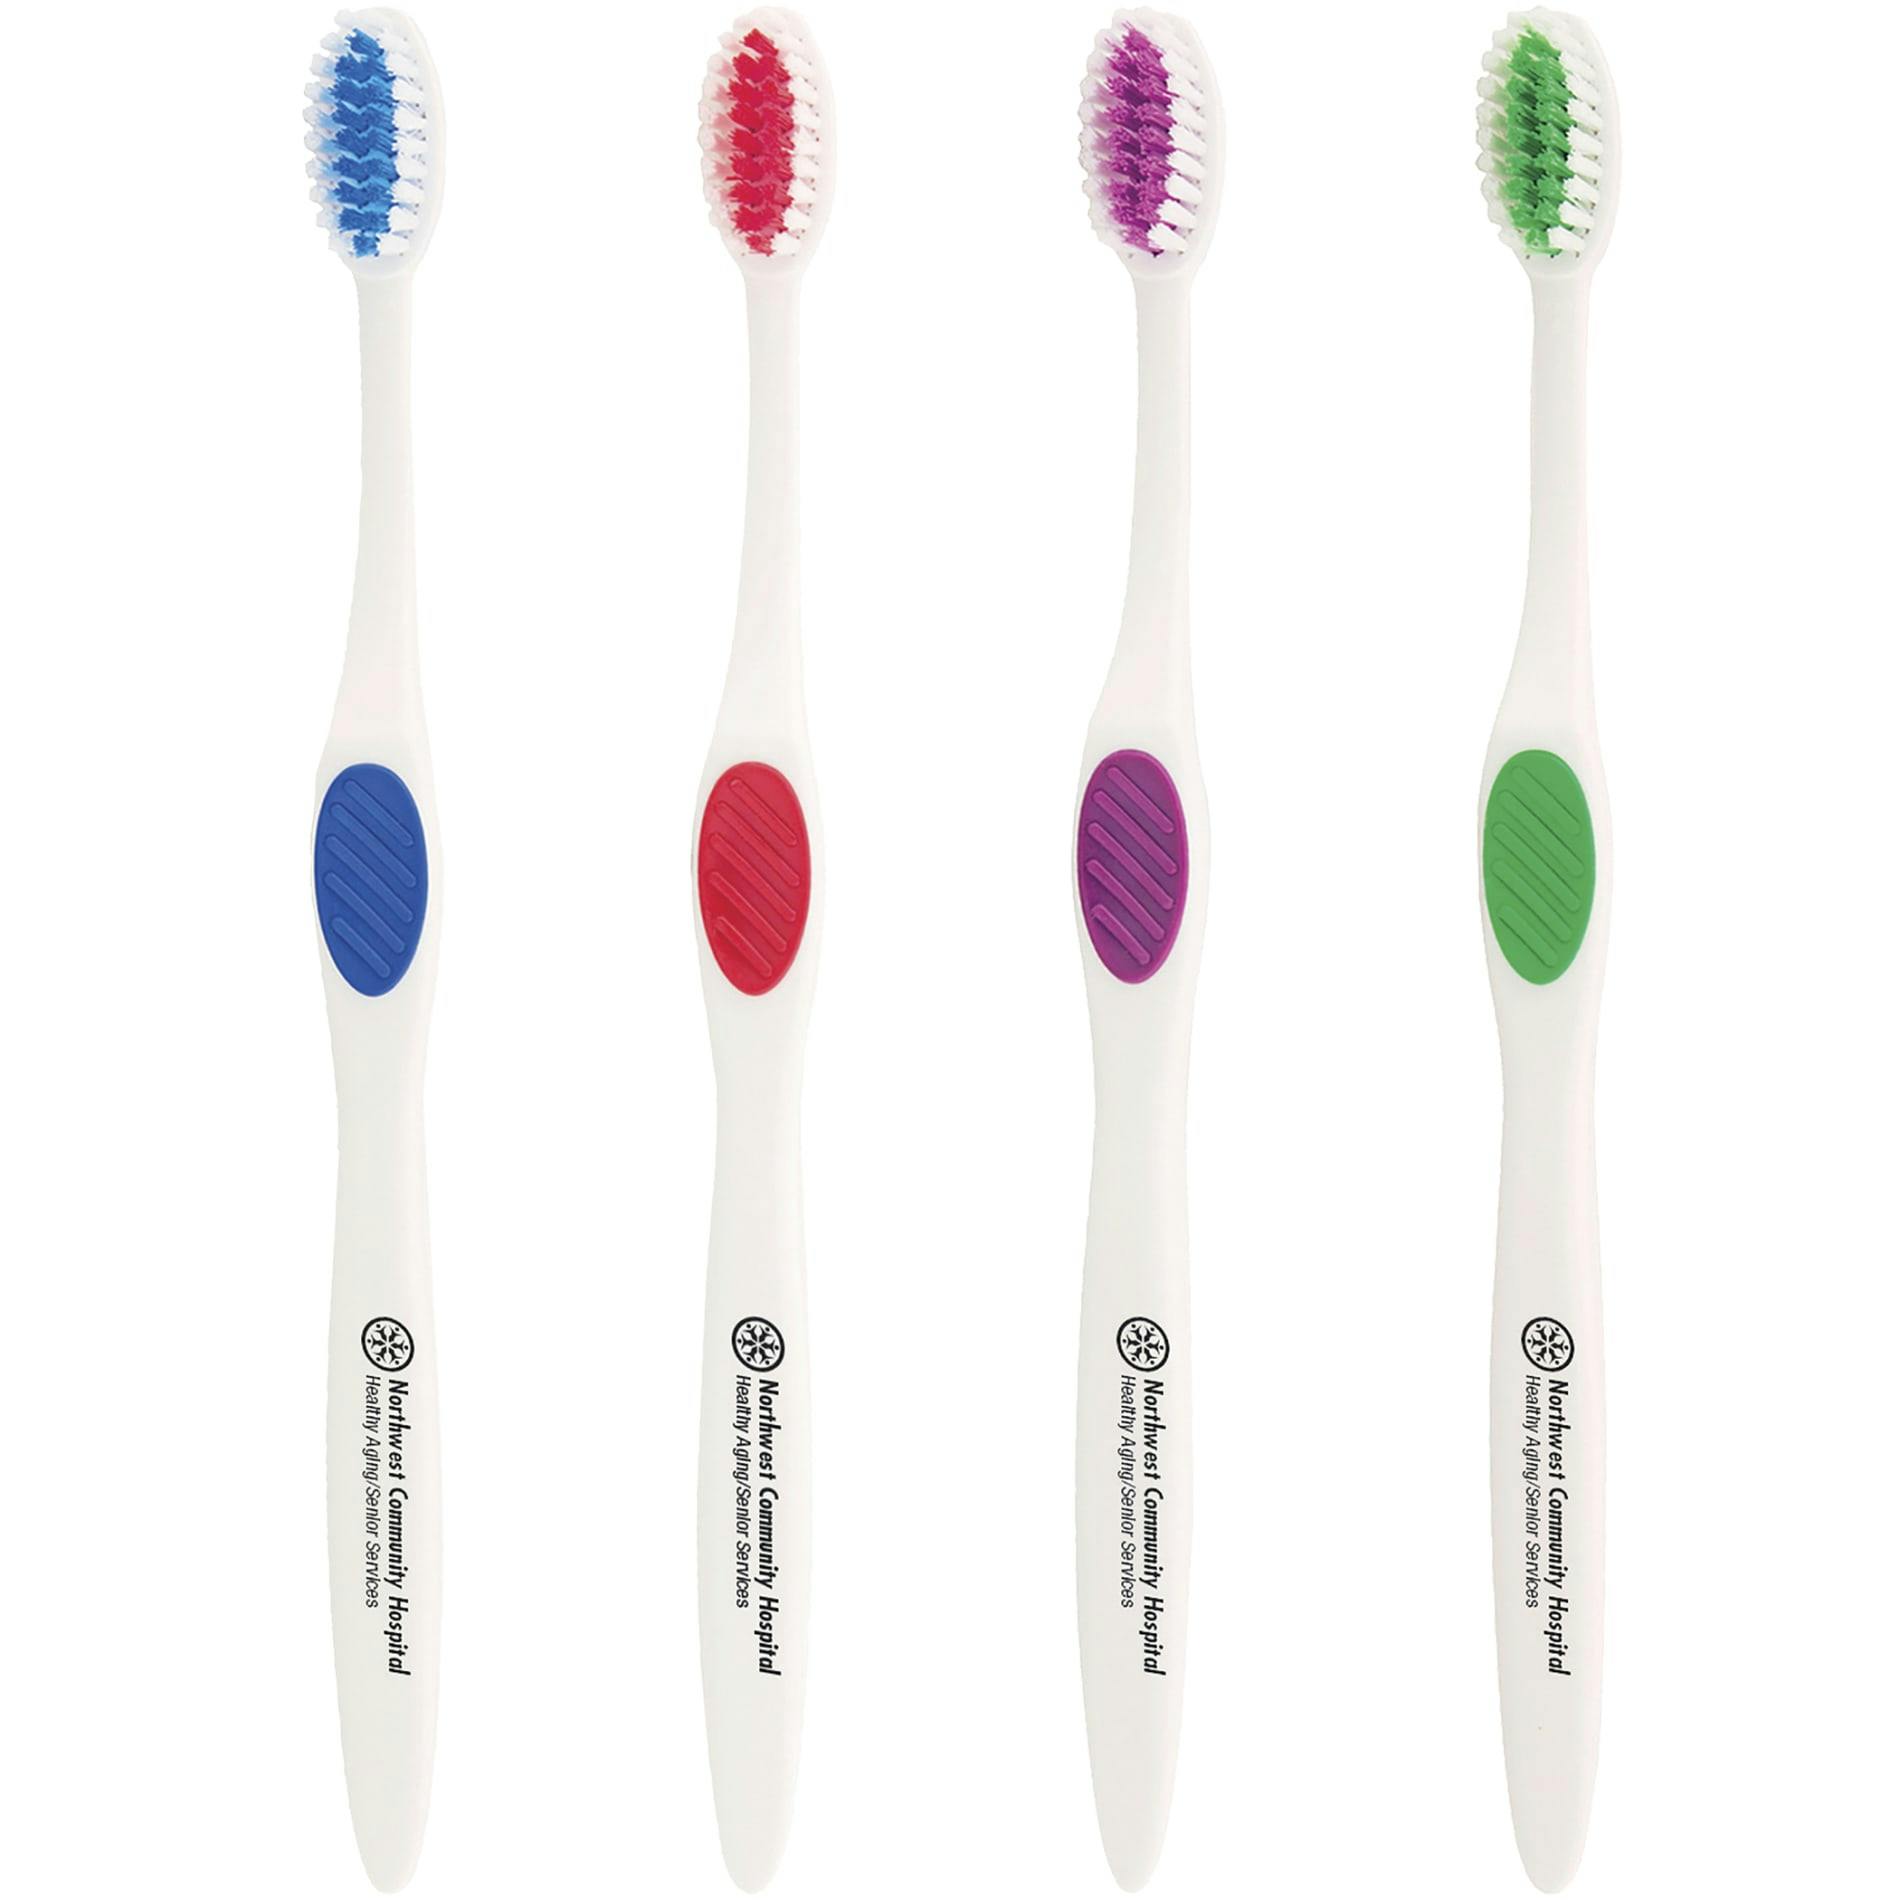 Winter Accent Toothbrush - additional Image 1